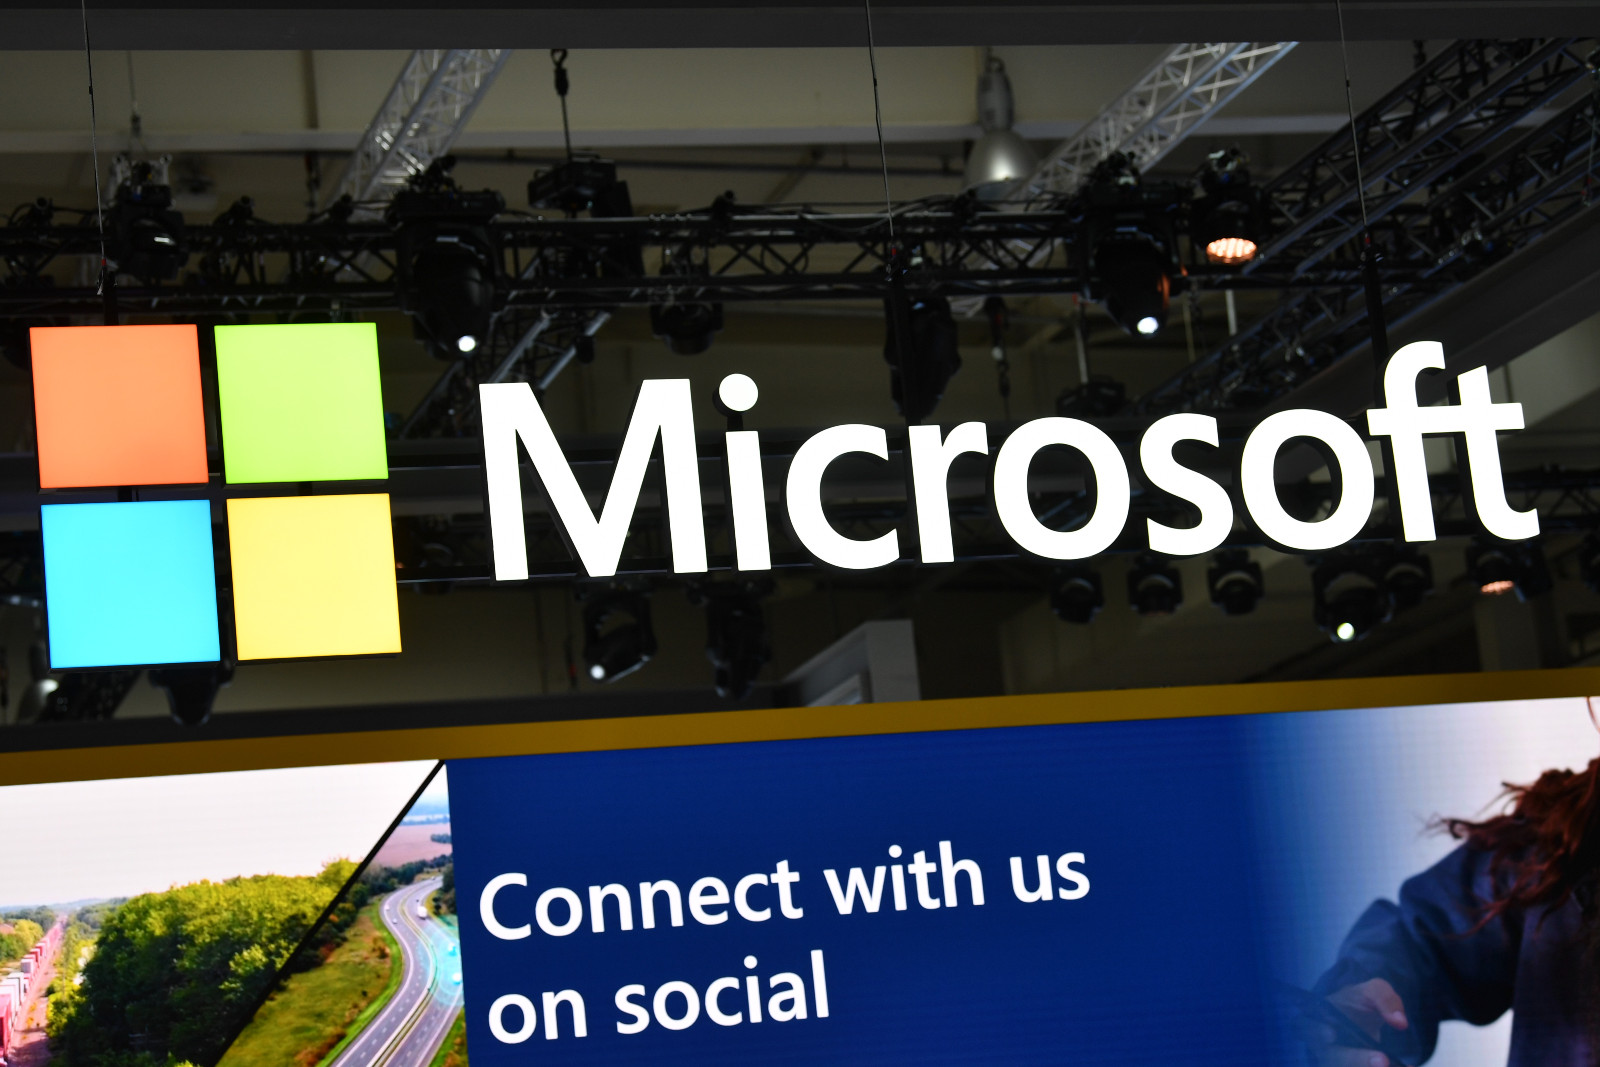 The logo of Microsoft is seen at the 2023 Hannover Messe industrial trade fair on April 17, 2023 in Hanover, Germany.